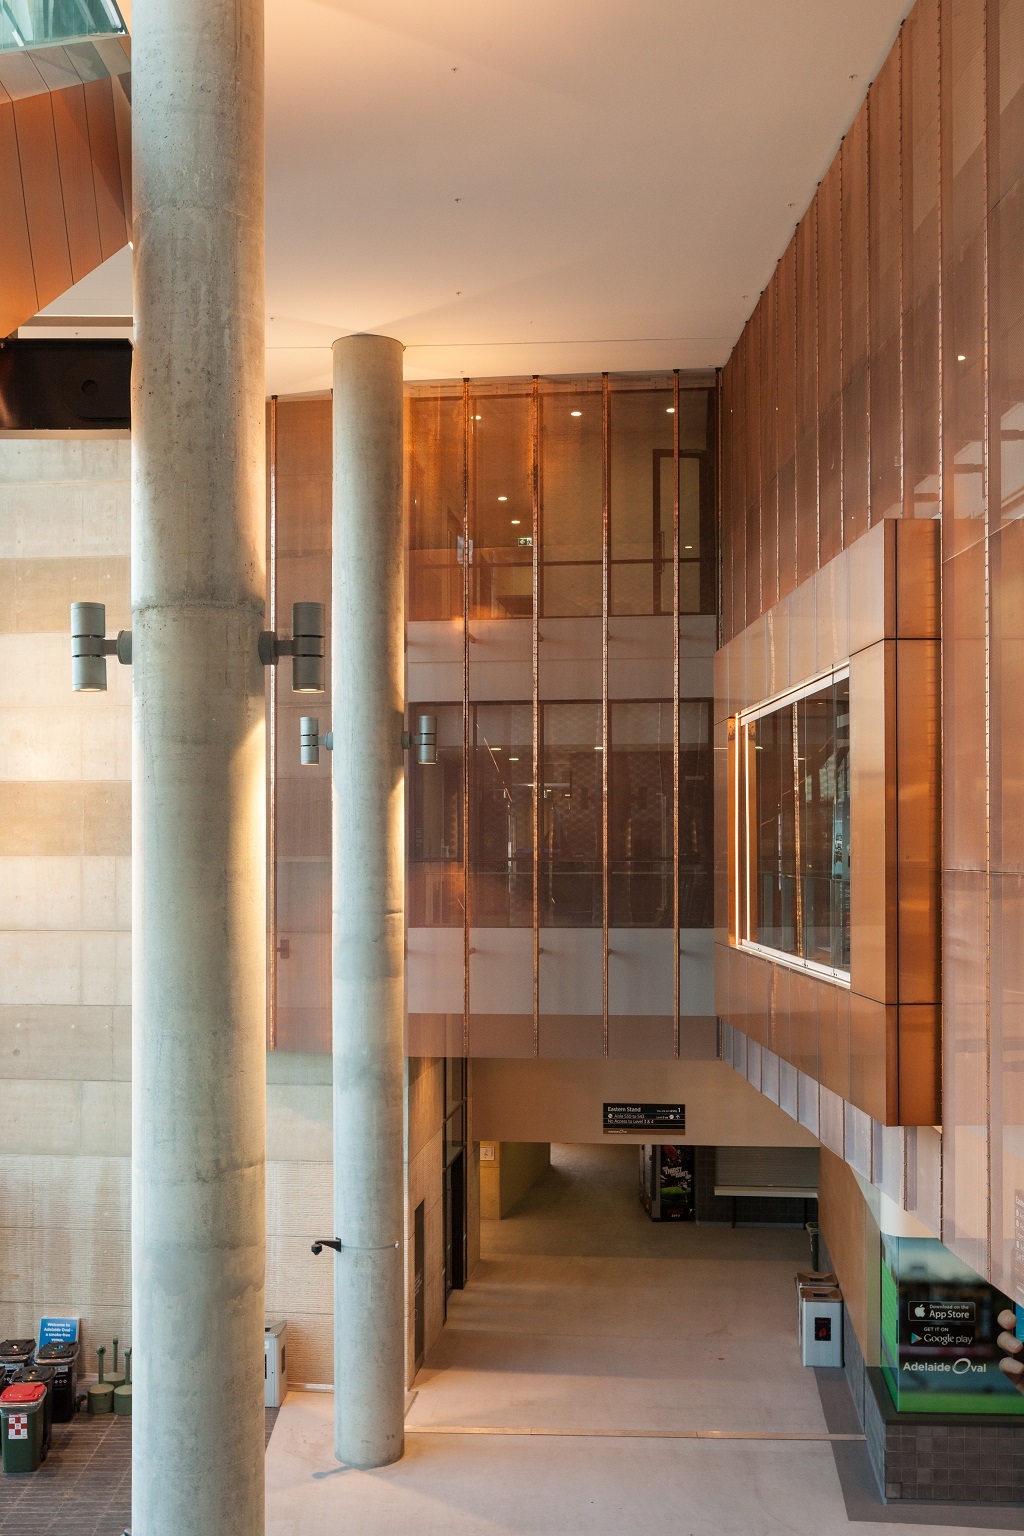 Interior of the Adelaide Oval building. Walls are decorated with Nordic Bronze clad volumes and mesh. Concrete Pillars rise from the ground level to the ceiling.